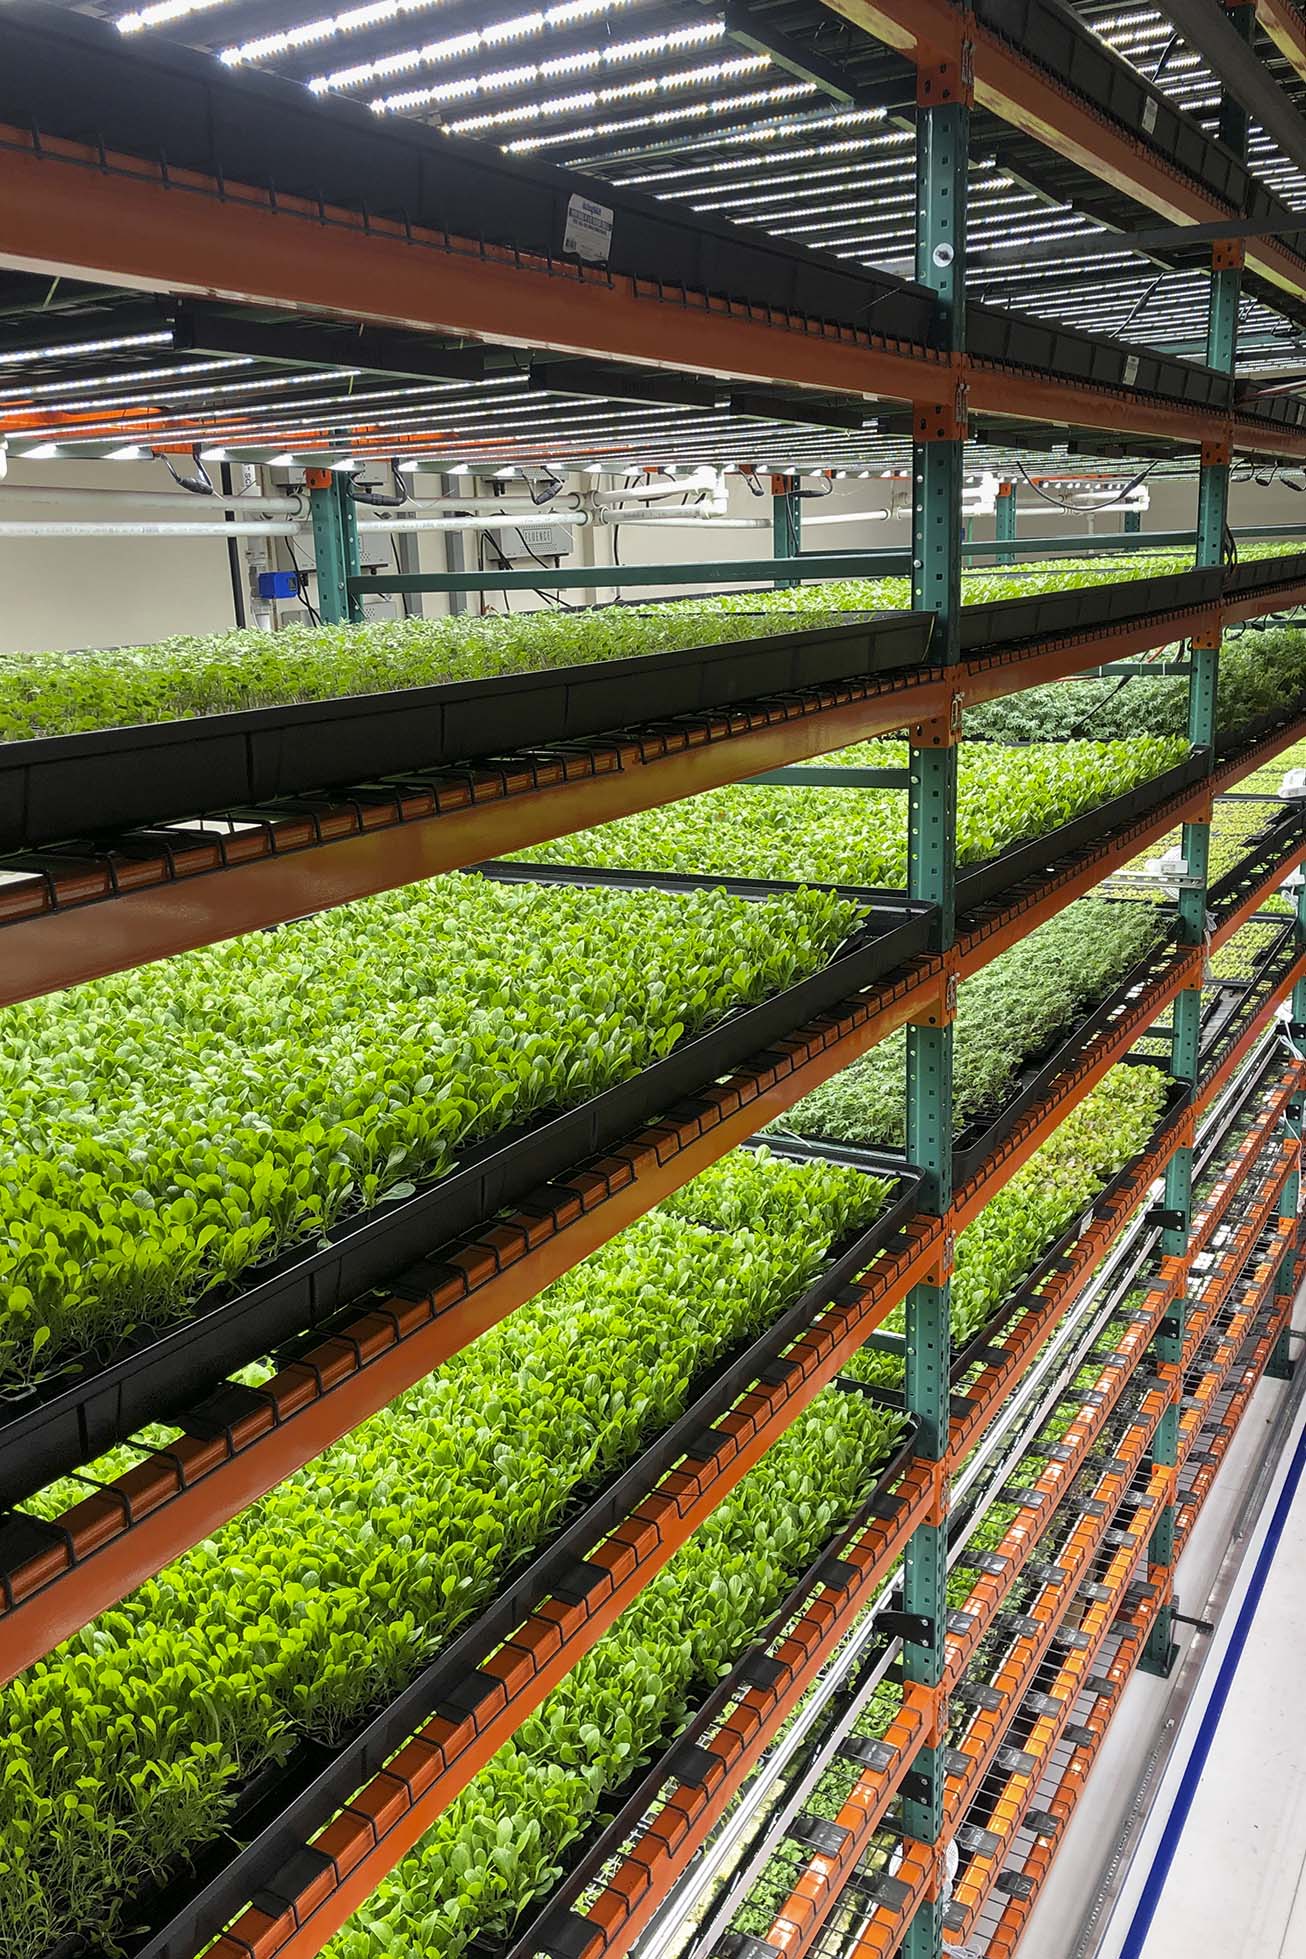 Rows of plants growing on shelves